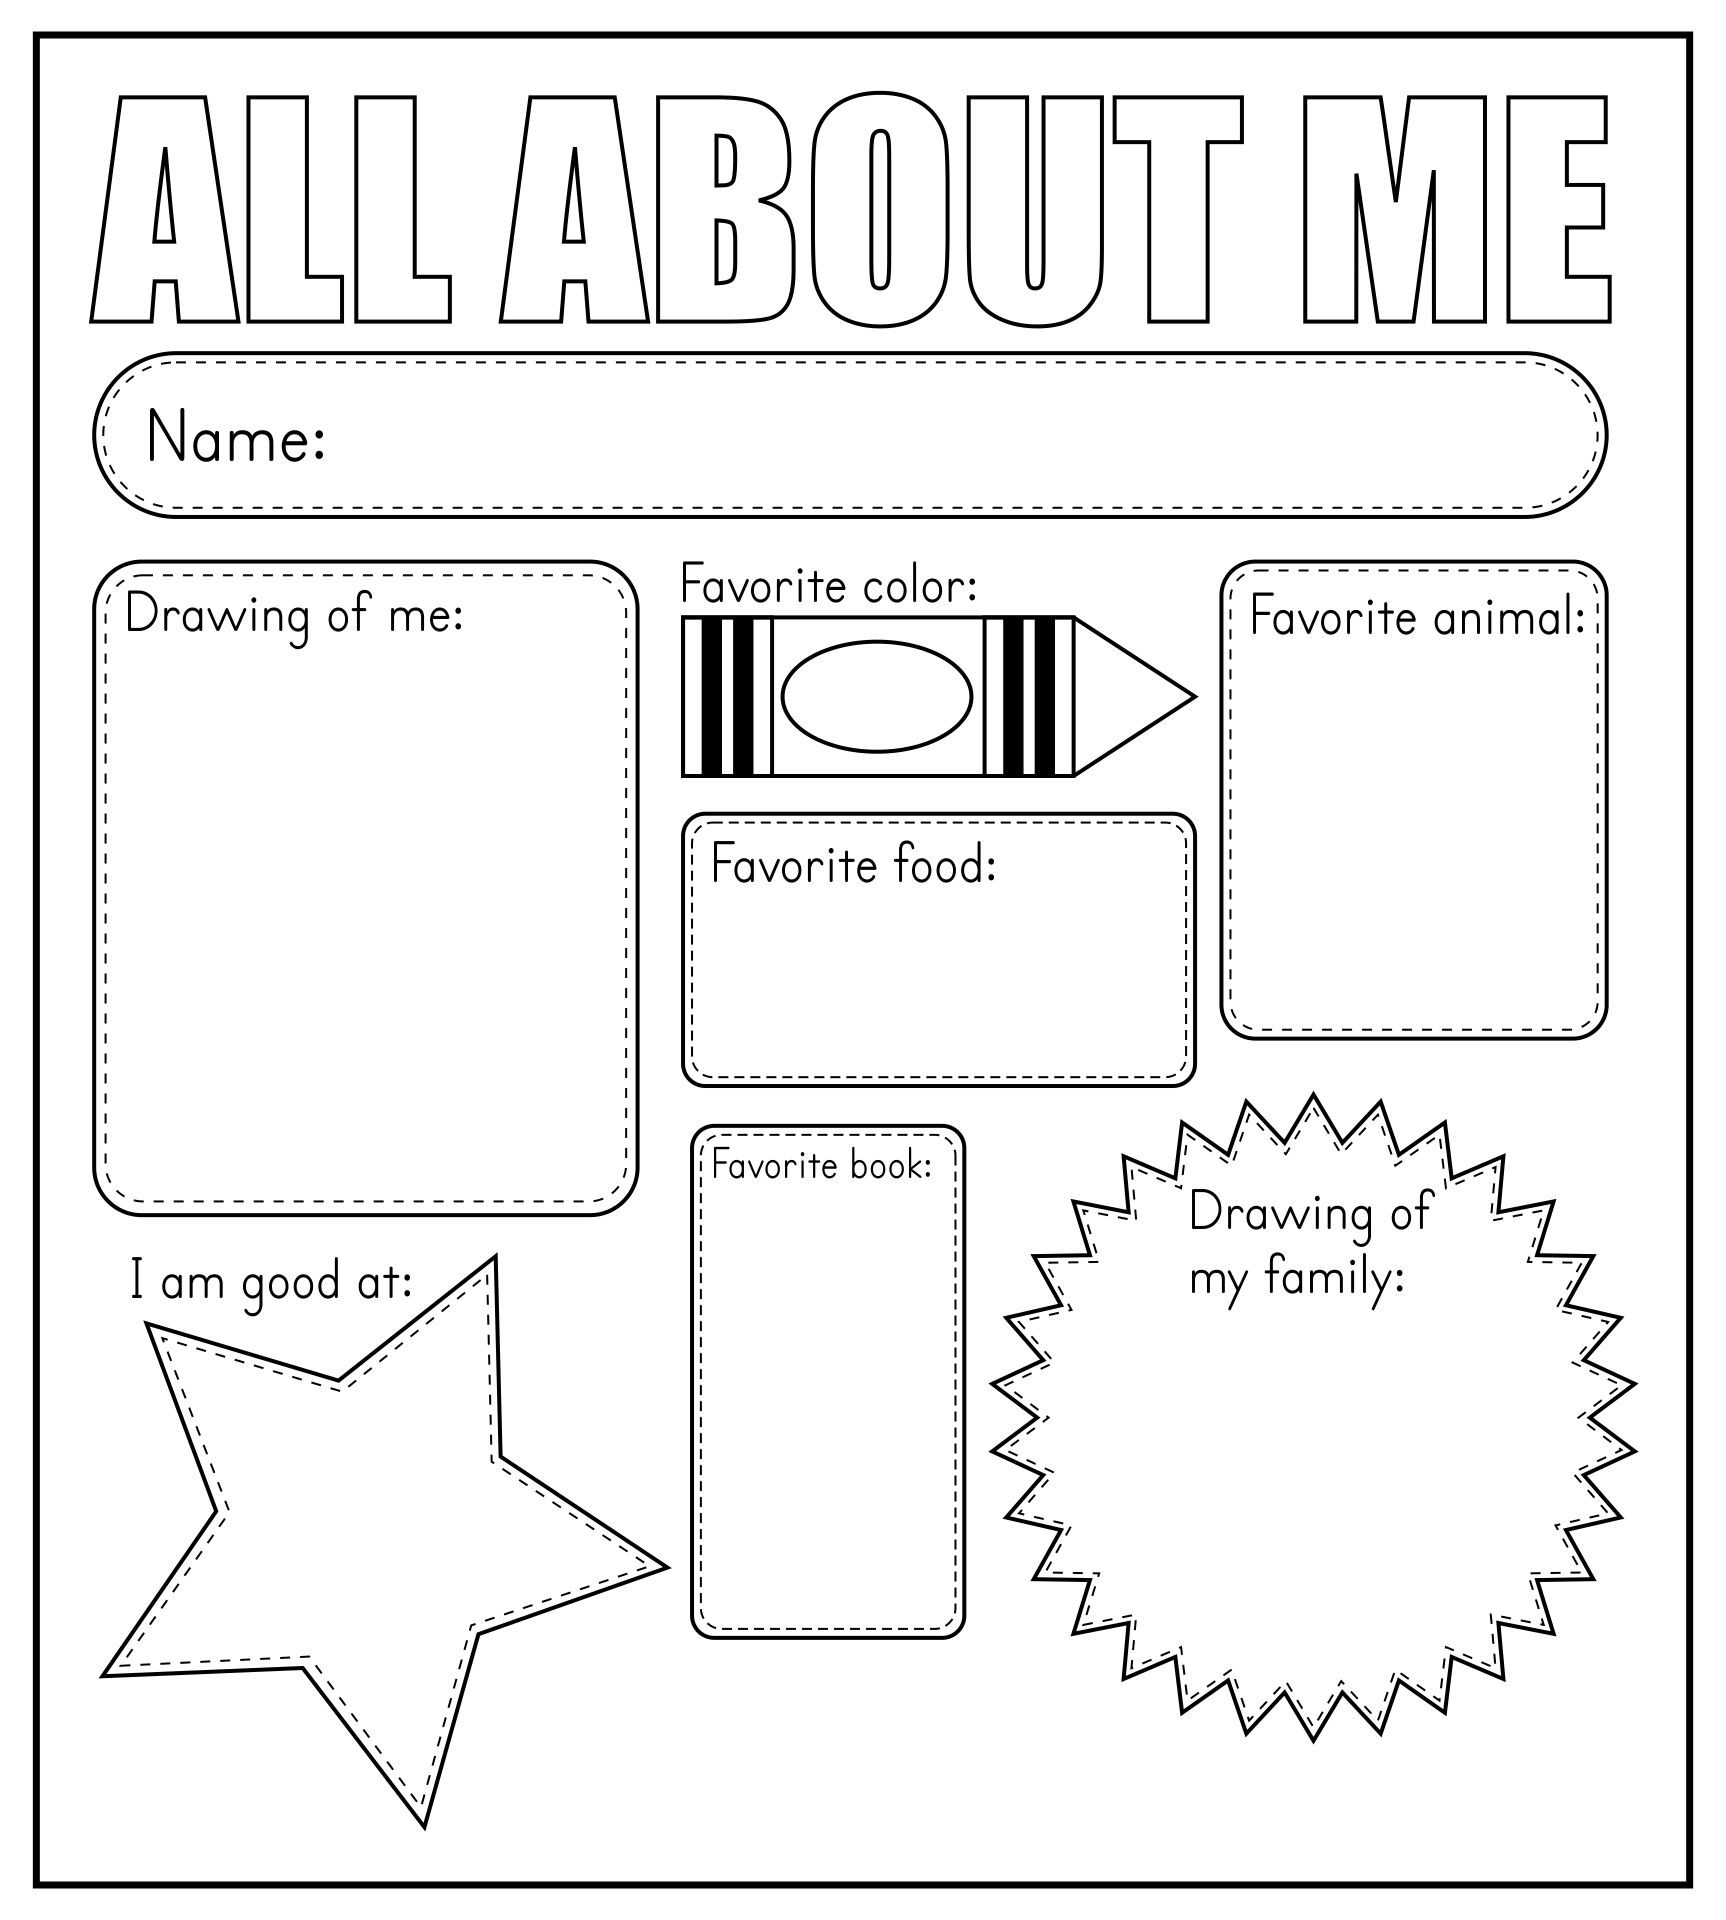 all-about-me-banner-free-printable